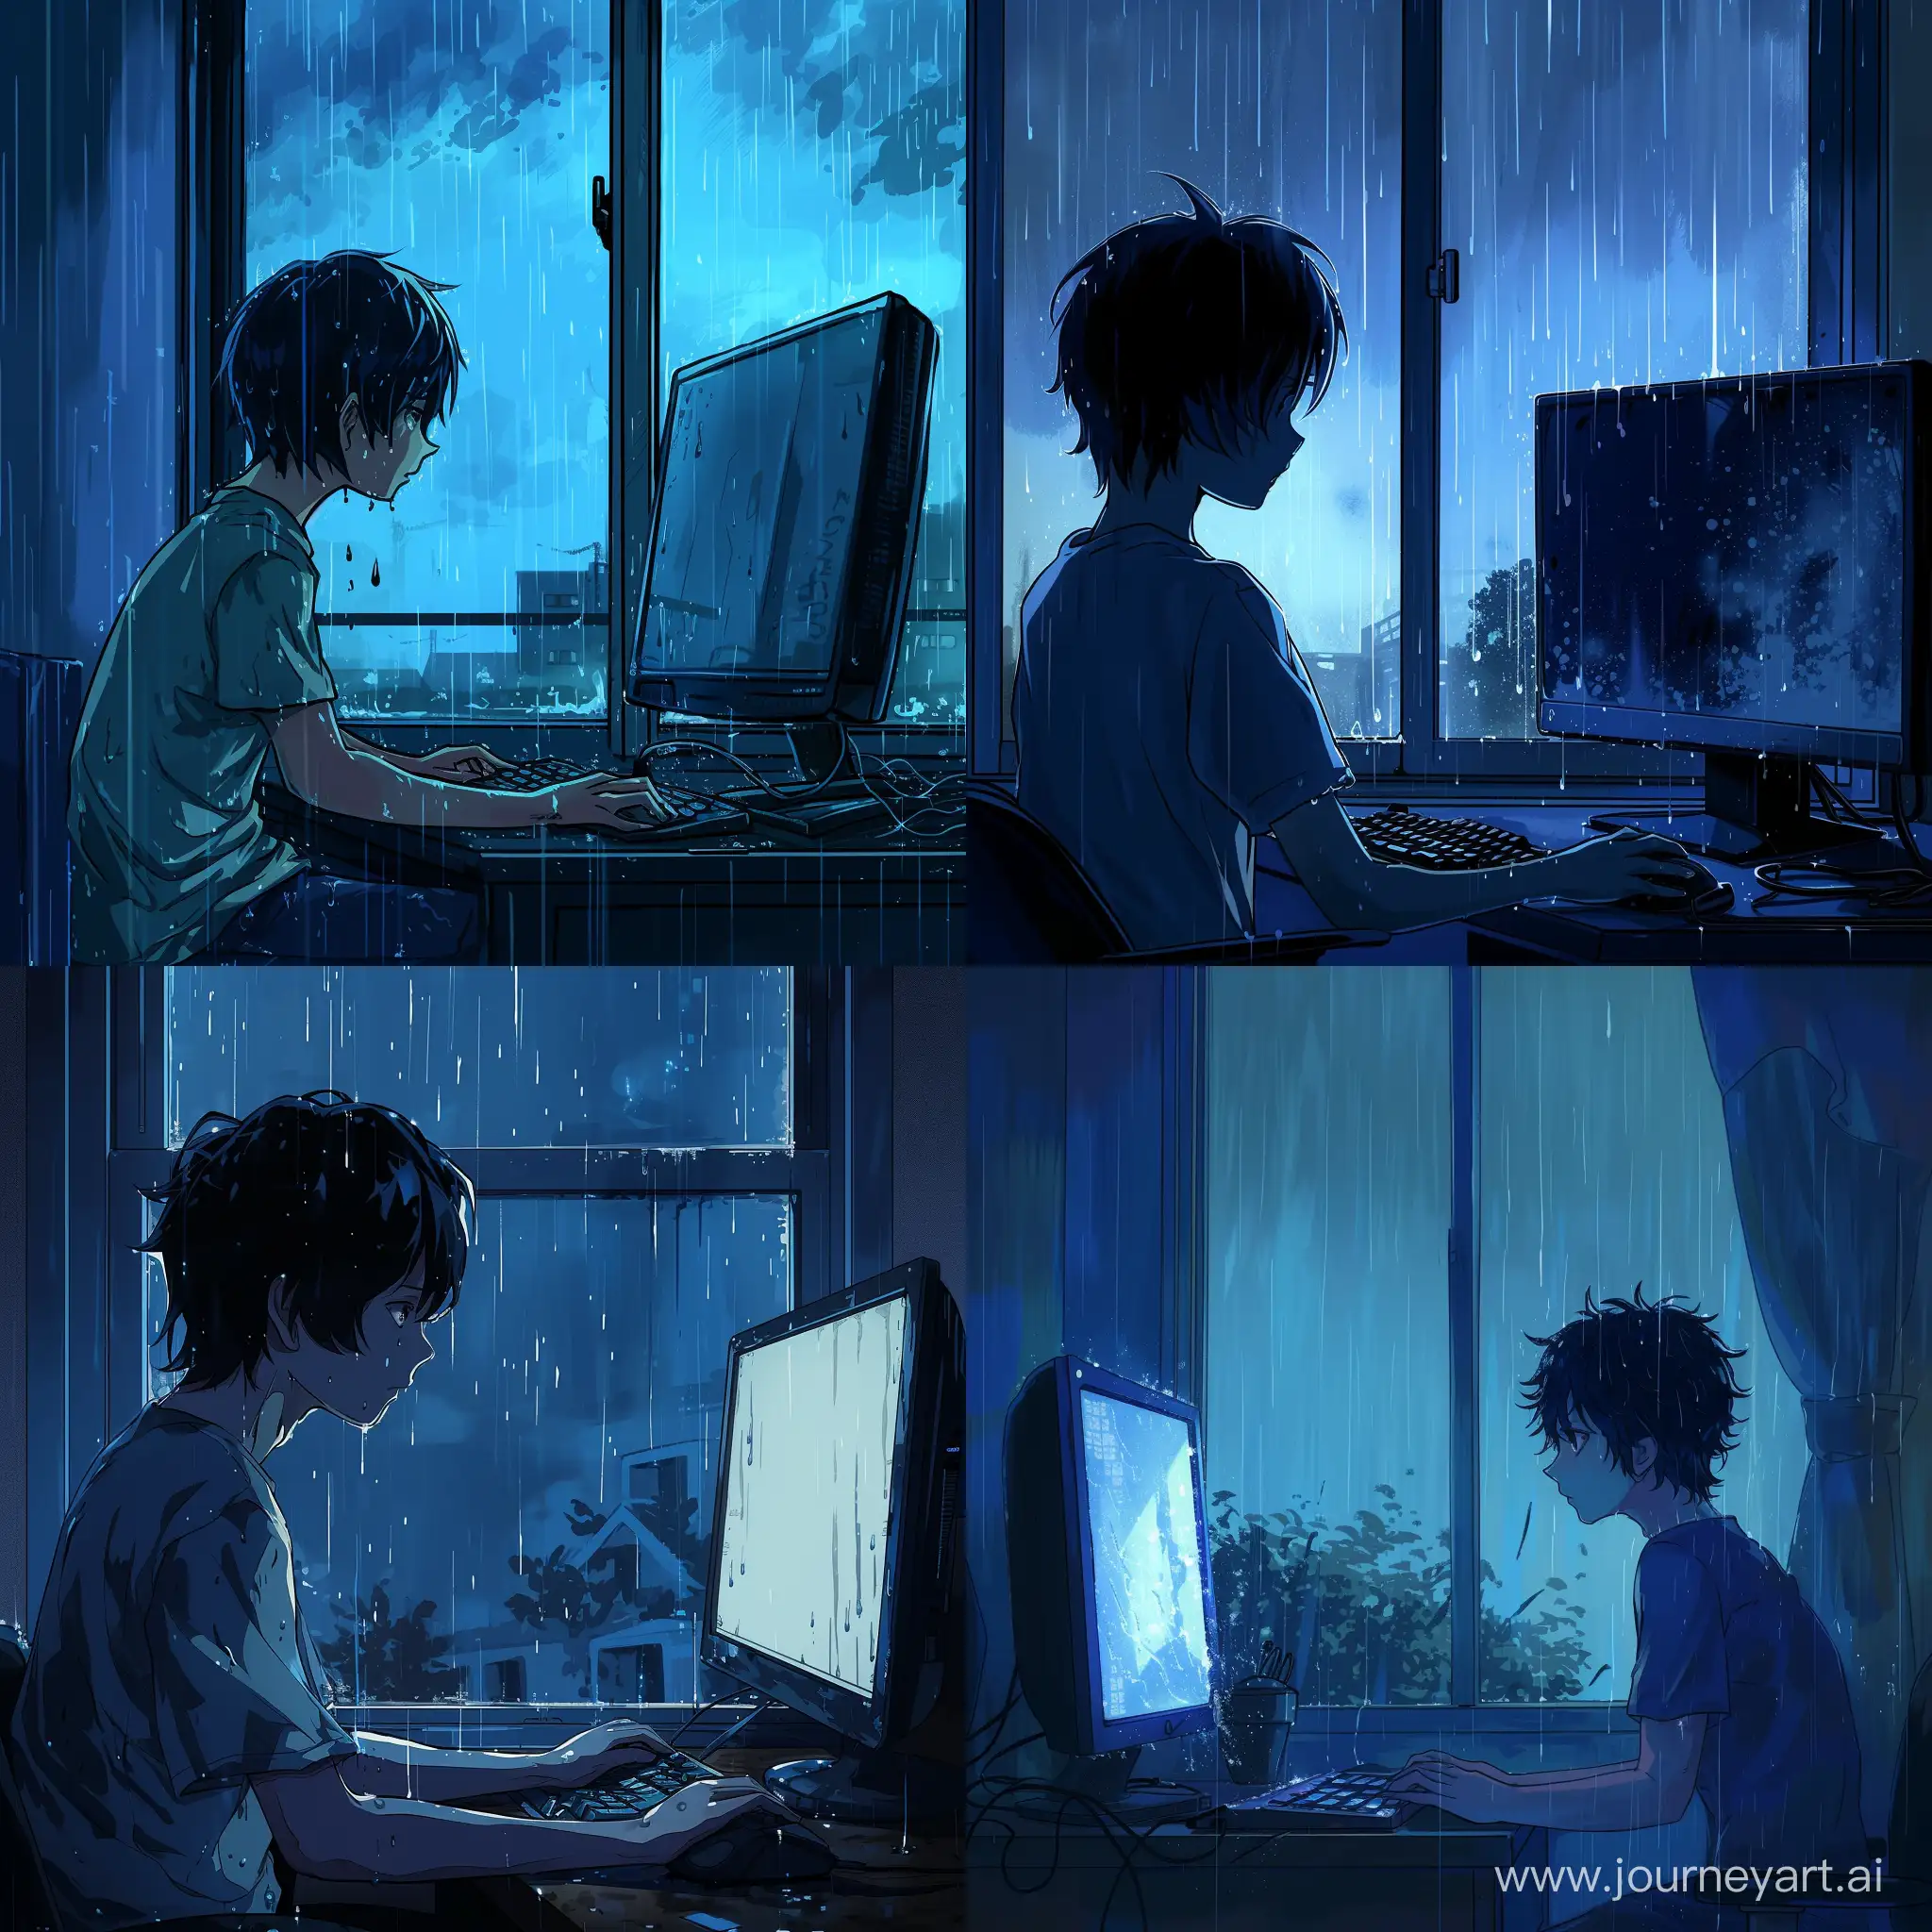 Lonely-16YearOld-Boy-in-Despair-with-Computer-on-Rainy-Day